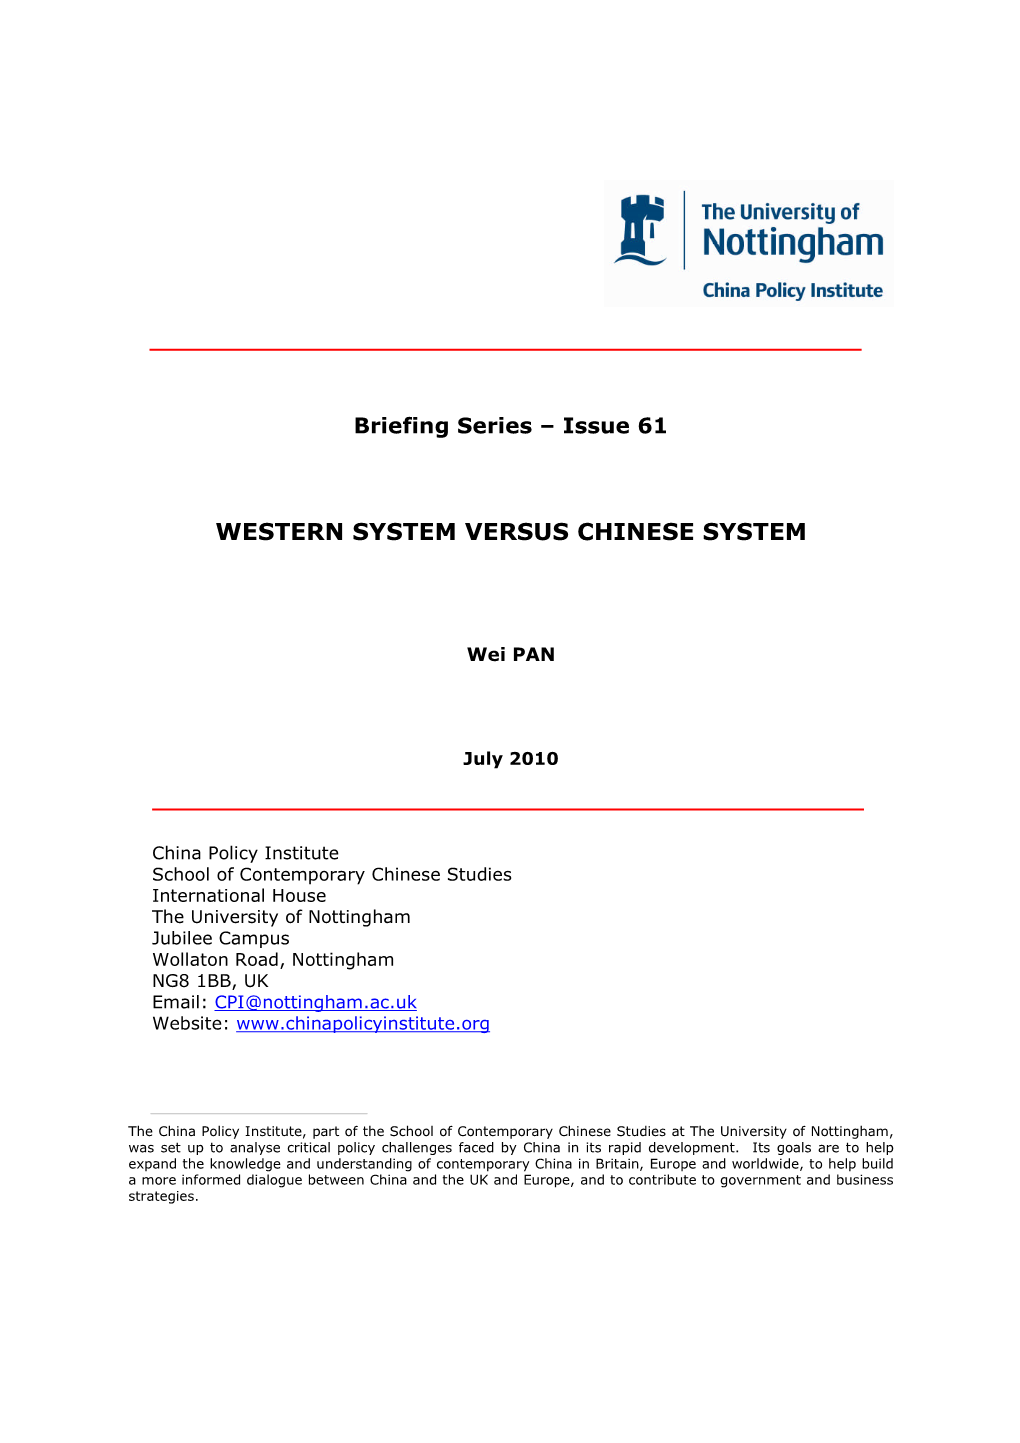 Western System Versus Chinese System